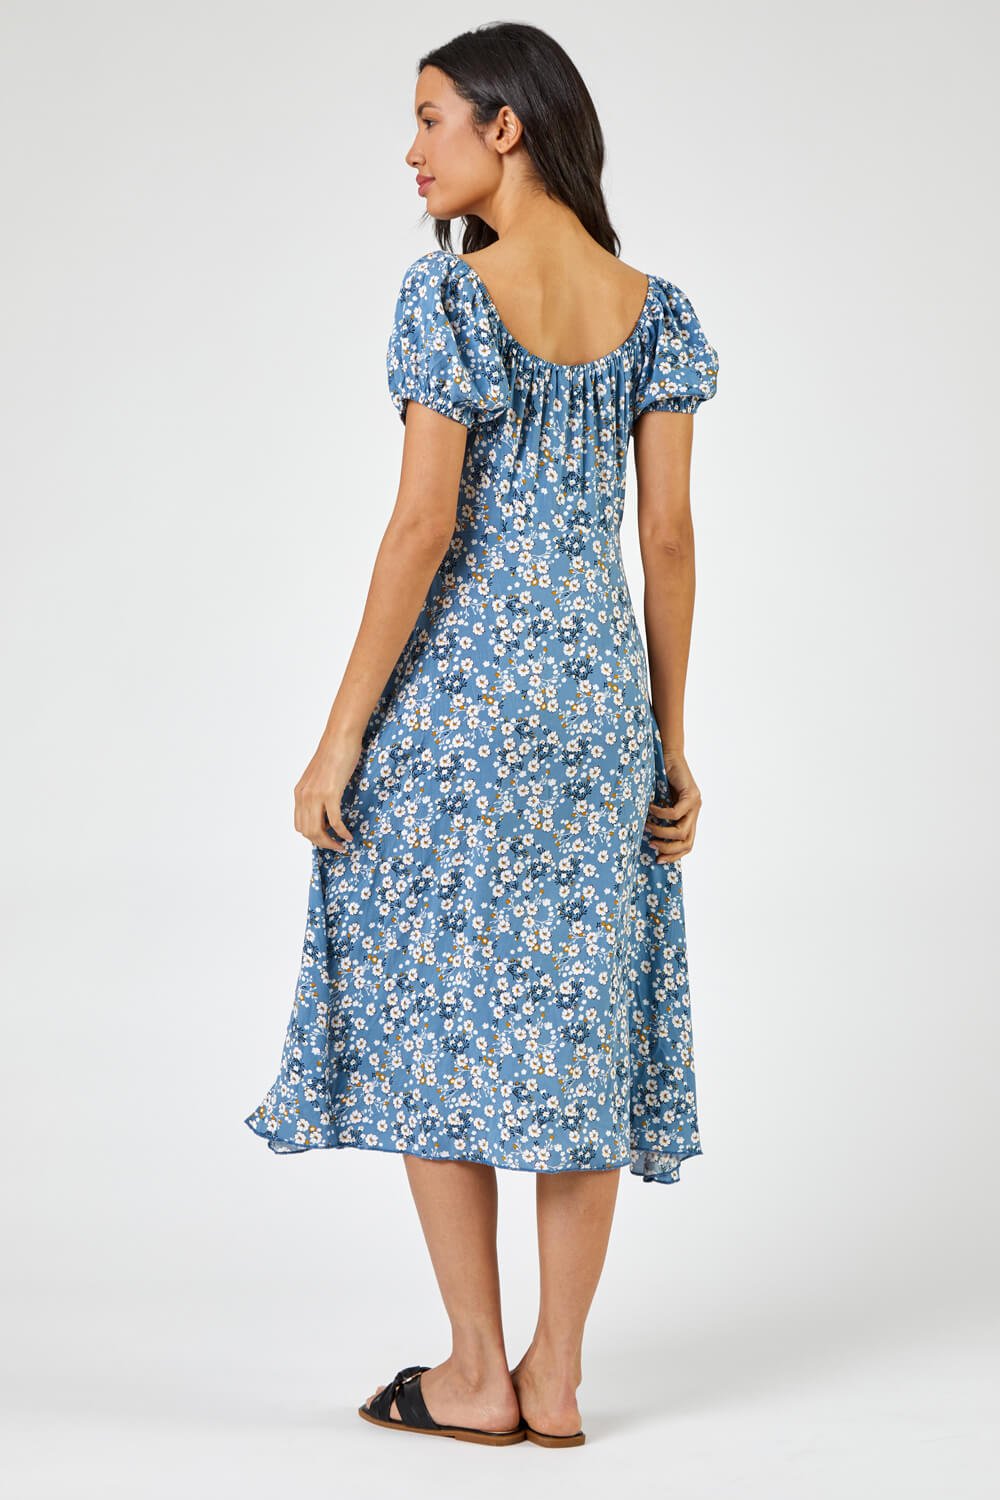 Blue Ditsy Floral Tie Neck Midi Dress, Image 2 of 5